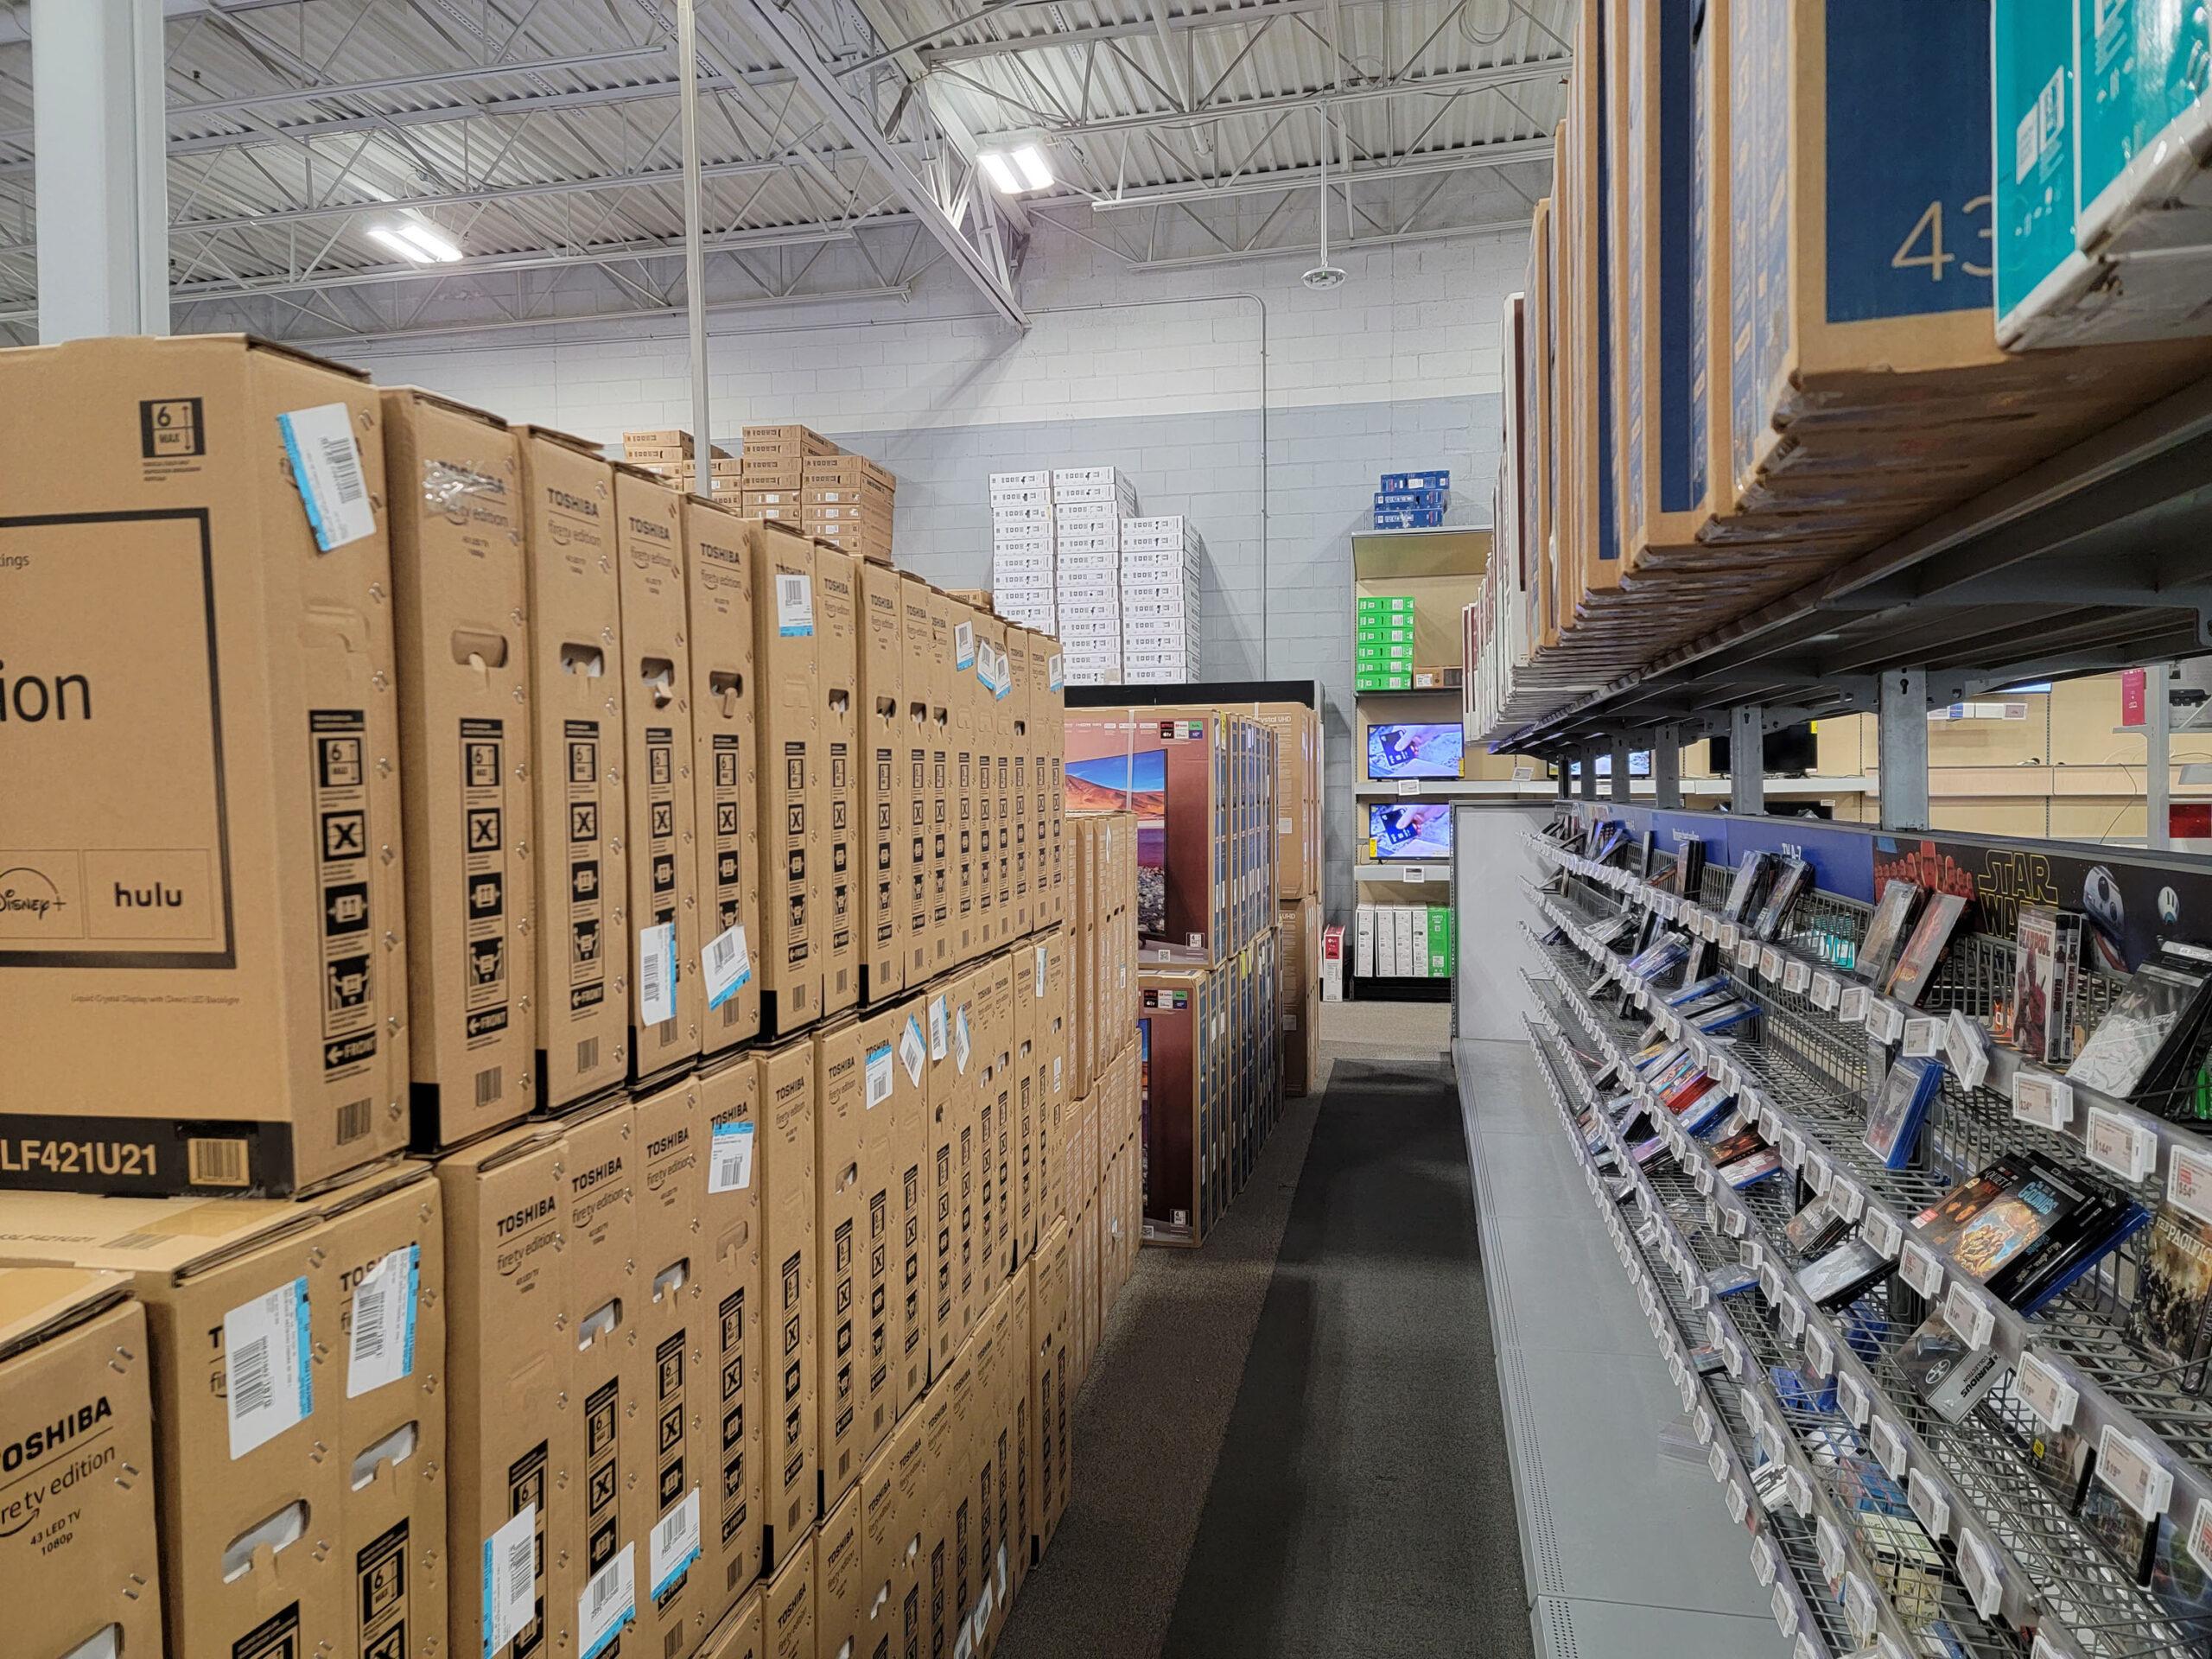 TV deals have long been a staple of Black Friday madness. But I've never seen so many pre-stocked TVs in one store. 2fb83170 20211119 165014 scaled